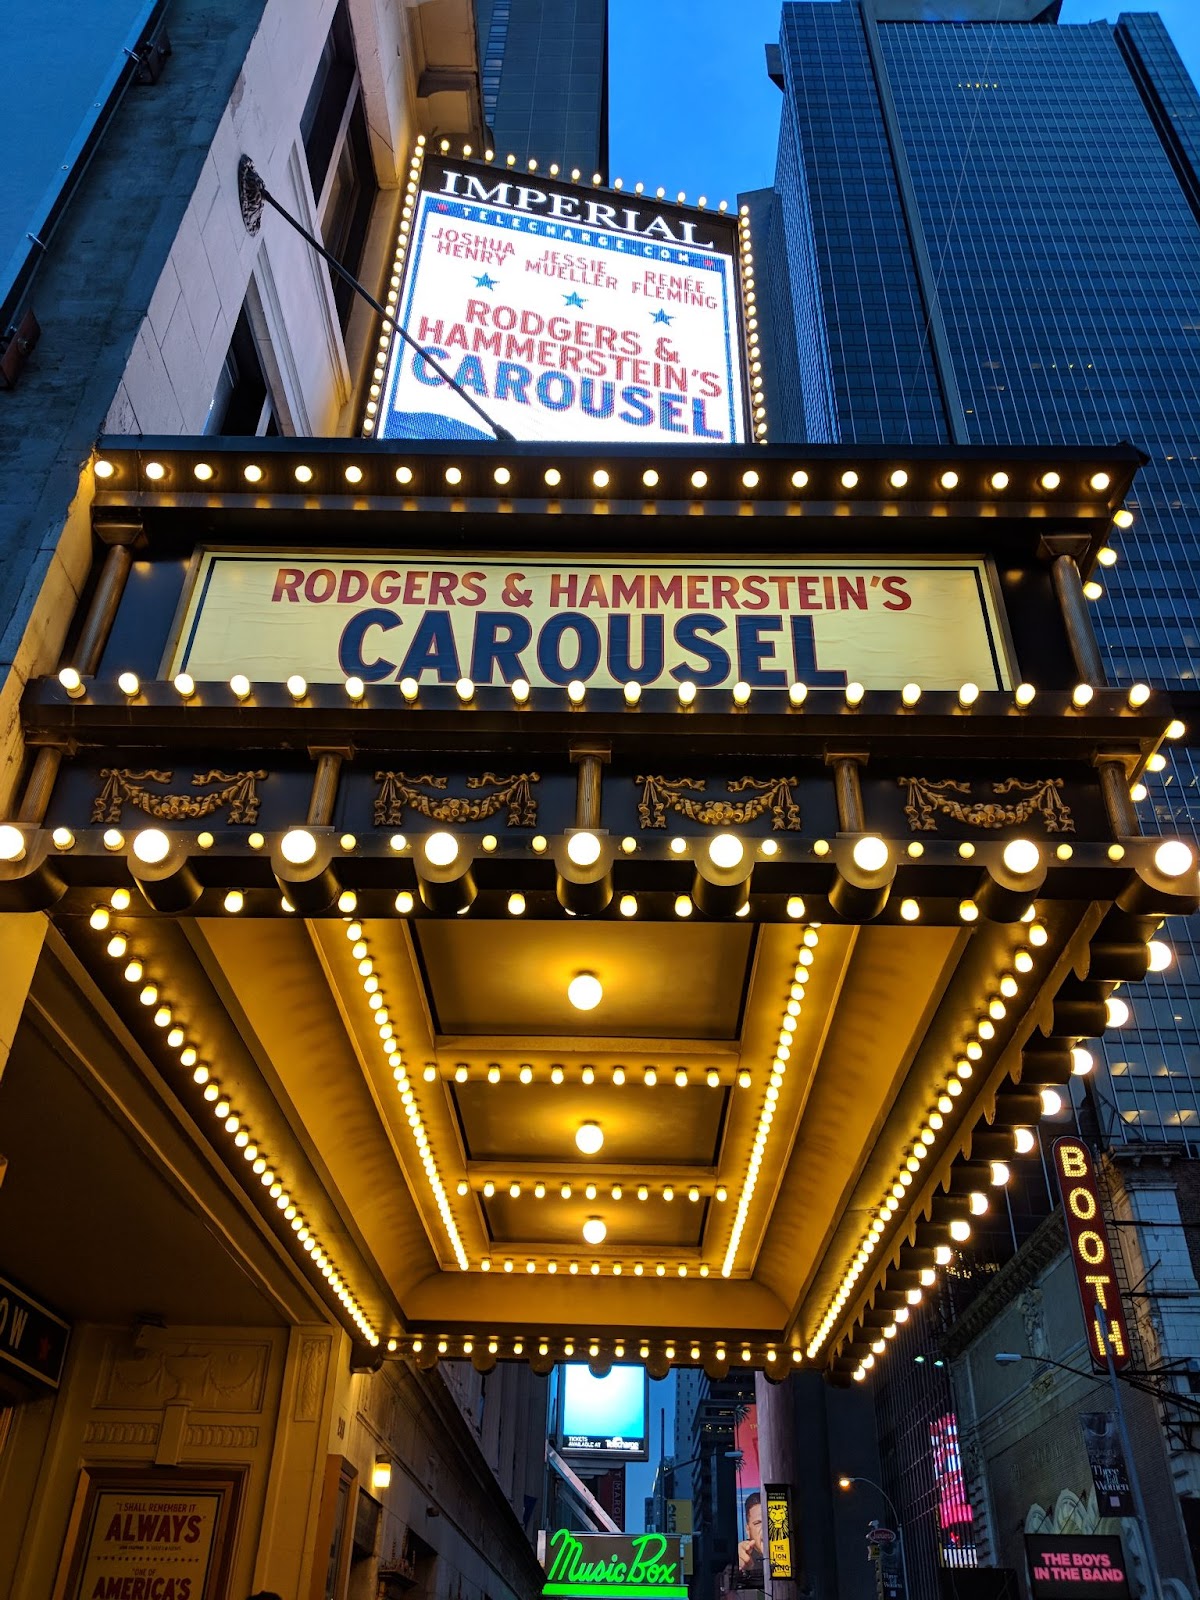 nyc broadway trip packages